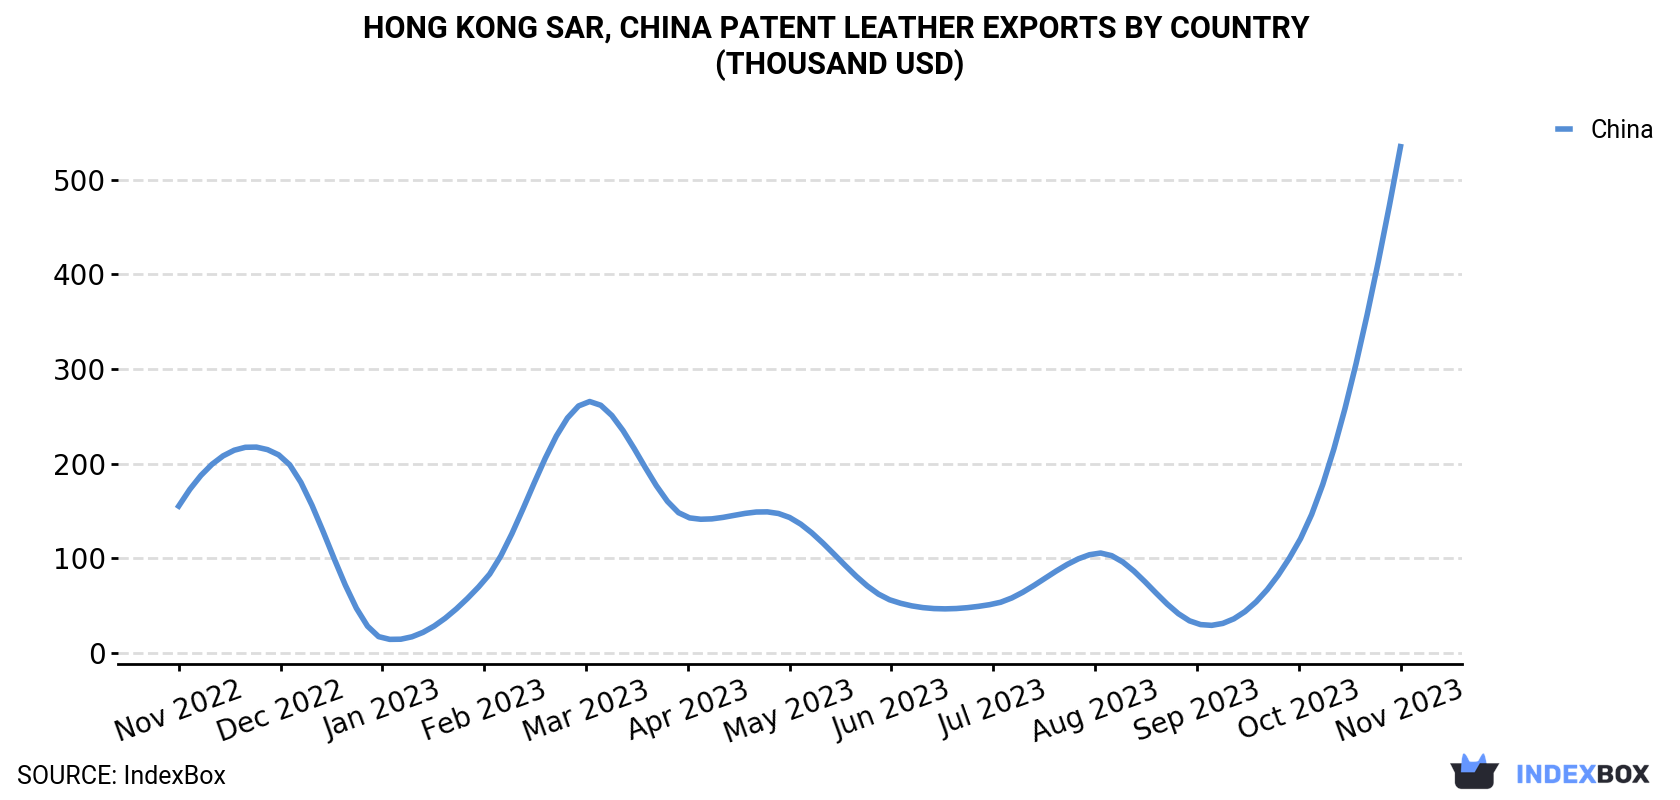 Hong Kong Patent Leather Exports By Country (Thousand USD)